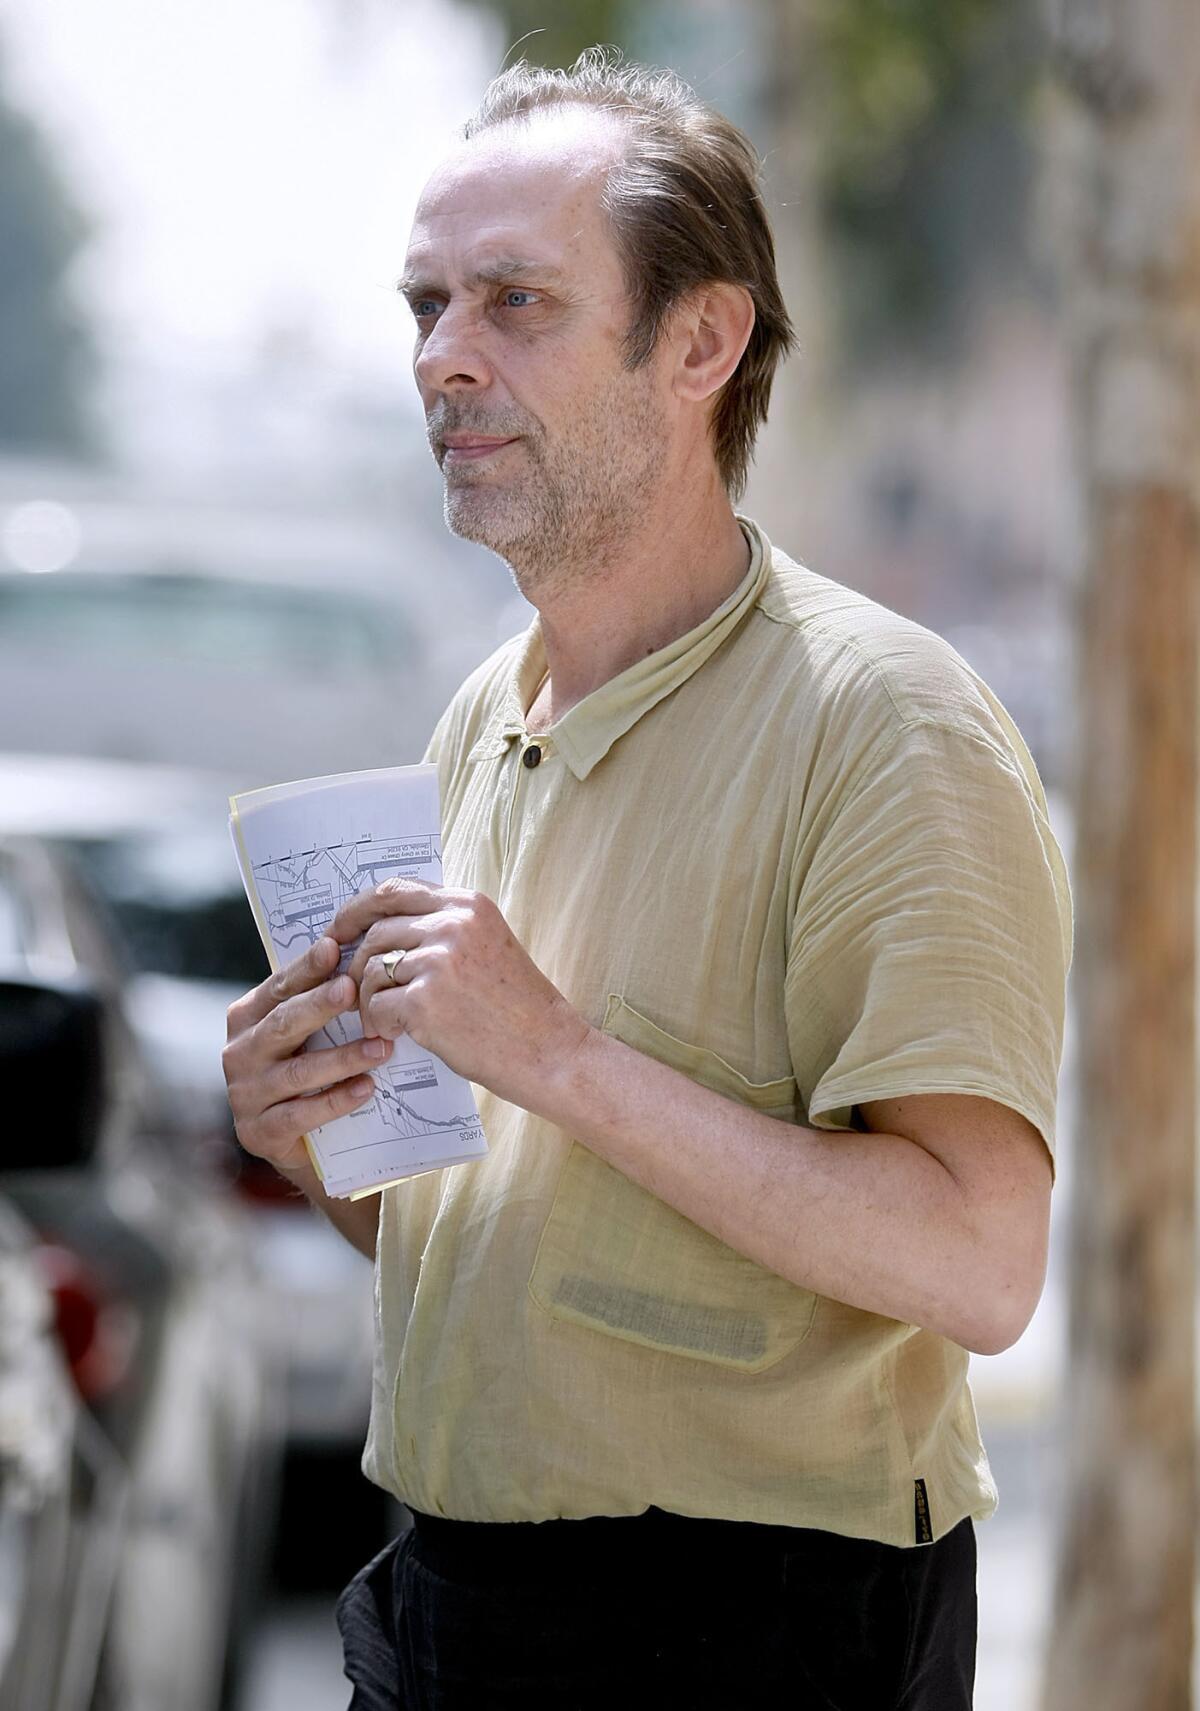 Goth¿rocker Peter Murphy holds paperwork as he comes out of the Glendale jail on Tuesday, March 19, 2013. The Bauhaus band lead singer spent the weekend in Jail after crashing his car into another one in Glendale on Saturday.